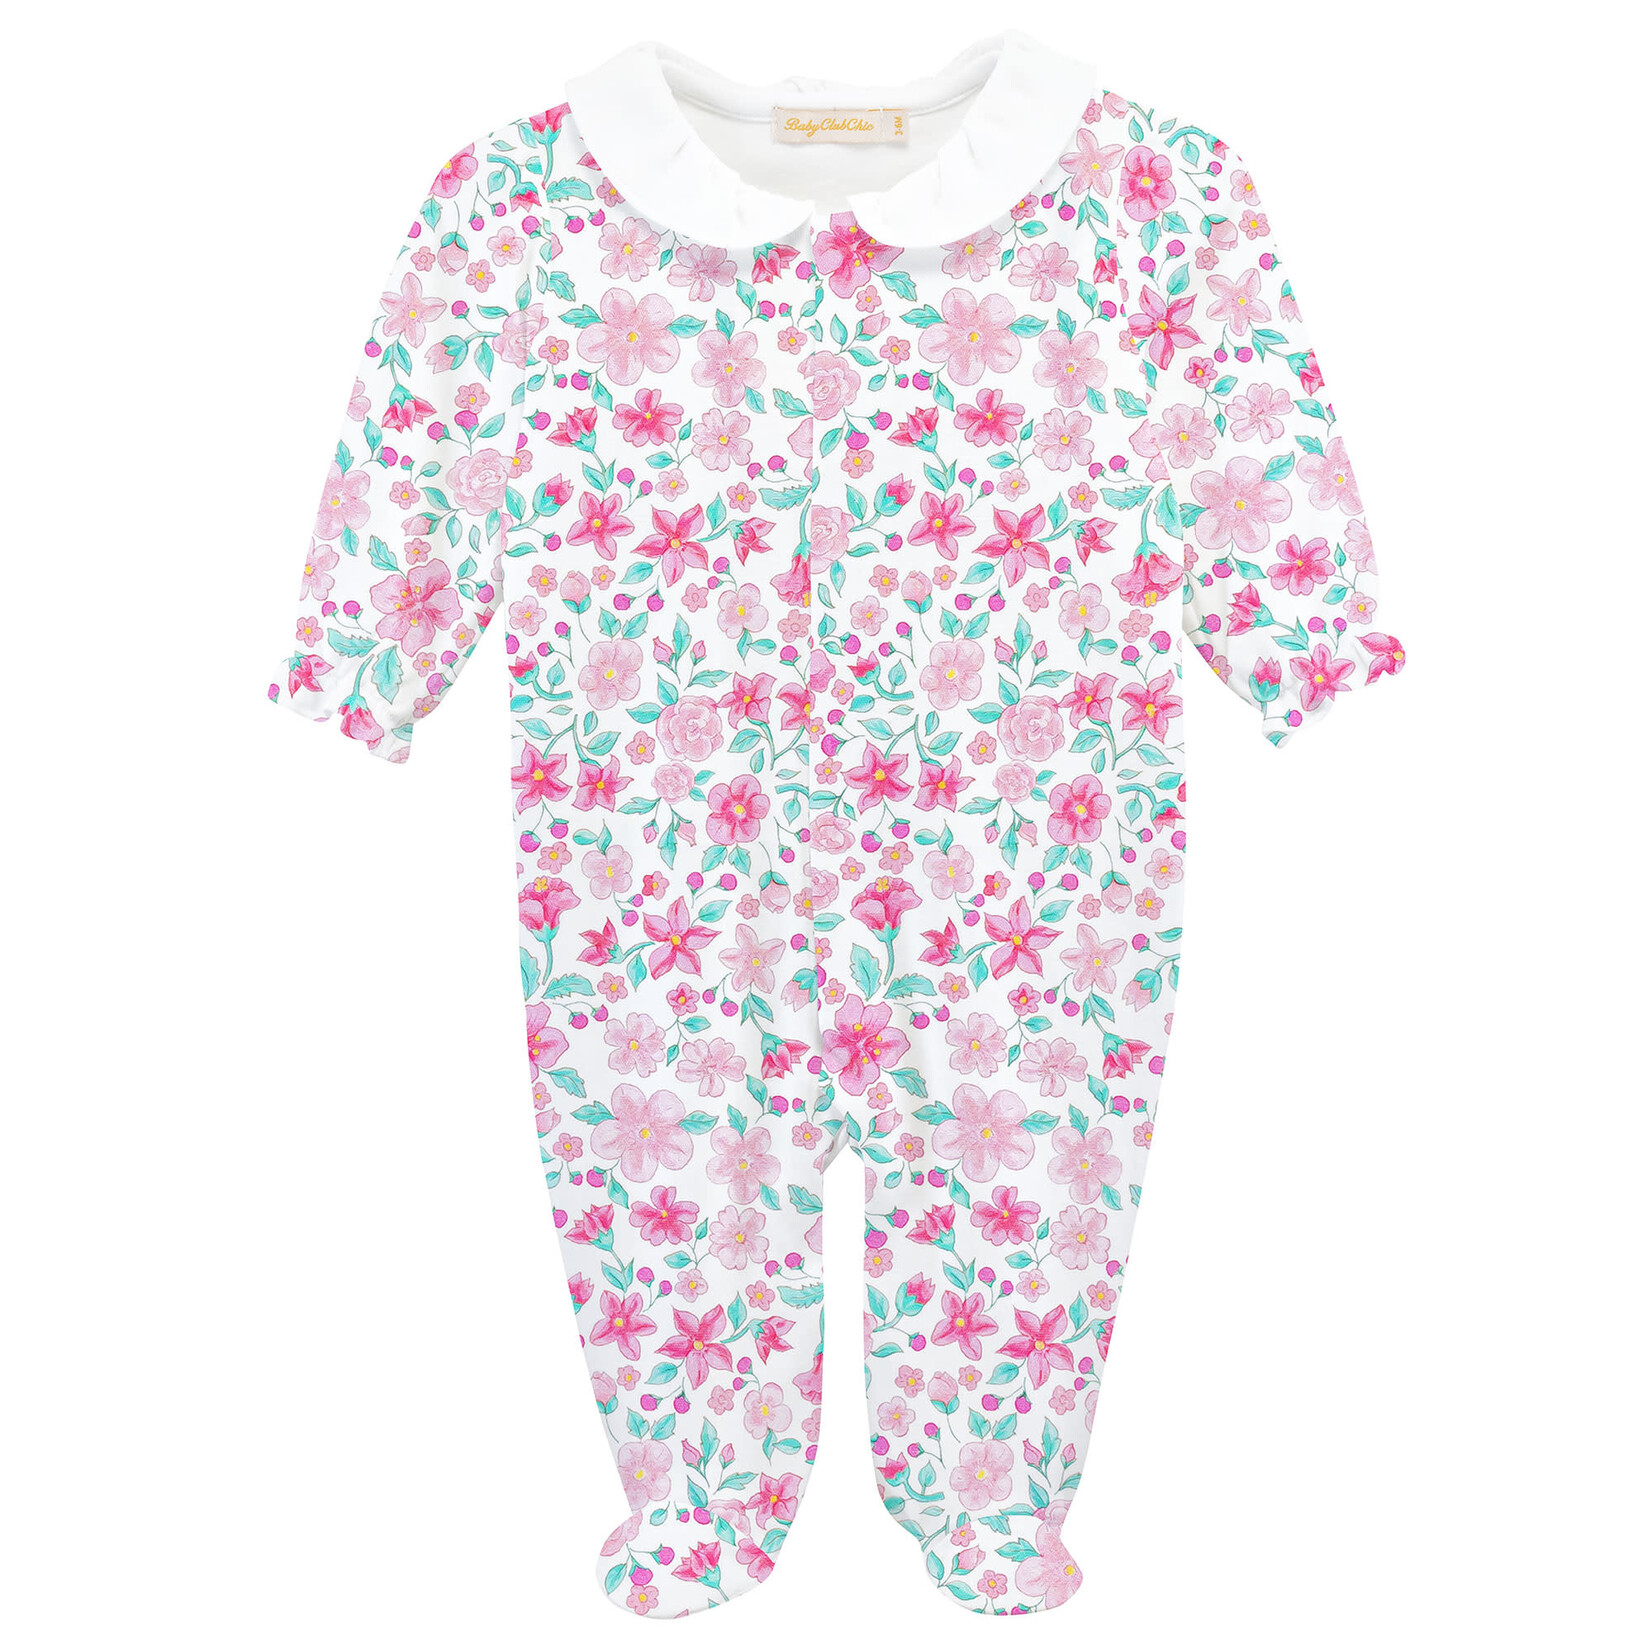 Baby Club Chic Blossom in Pink Footie w/ Round Collar